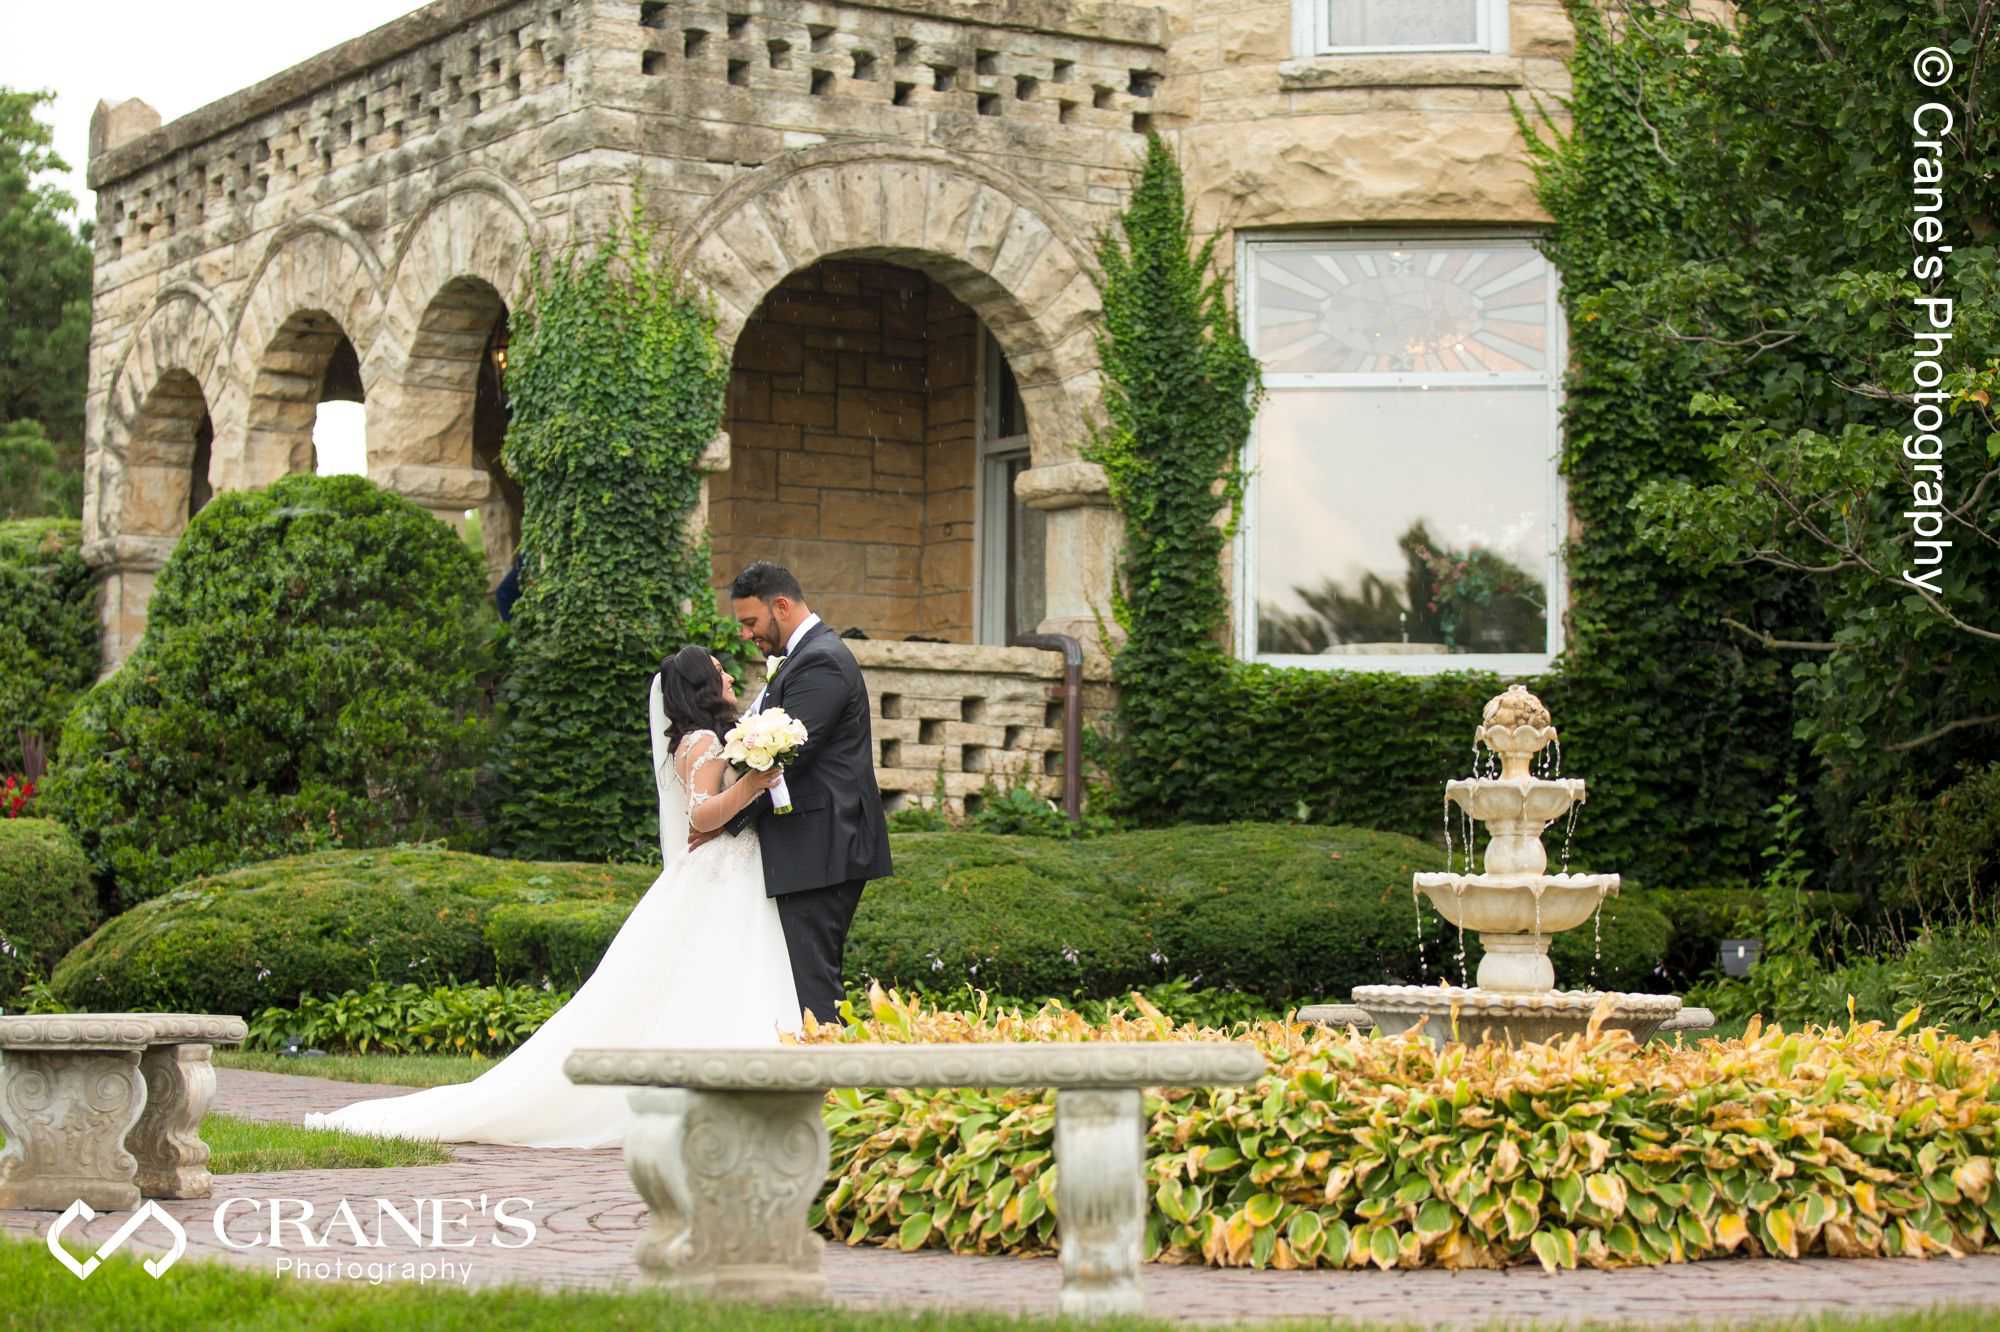 Modern bride and groom wedding photo taken next to the fountain on the front of Haley Mansion